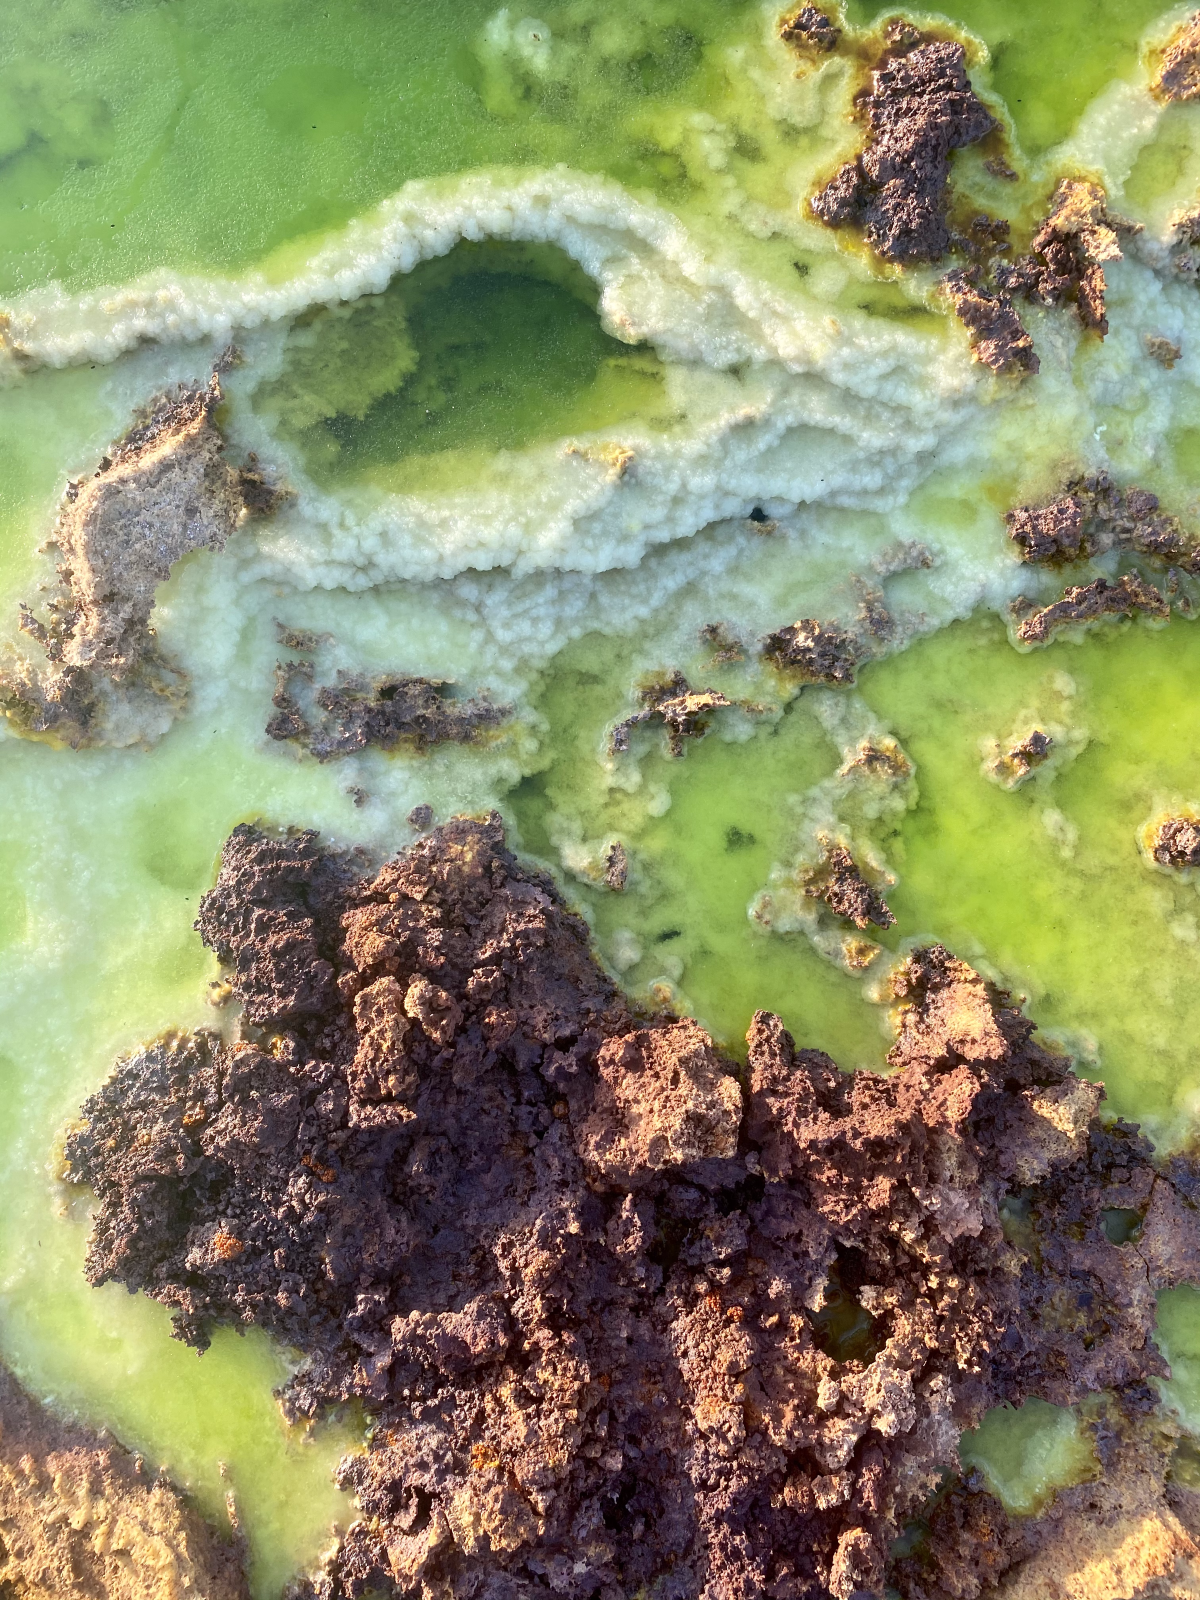 A close-up of a pond filled with clear greenish yellow liquid, white, layered crystallised formations, and rock-like clusters